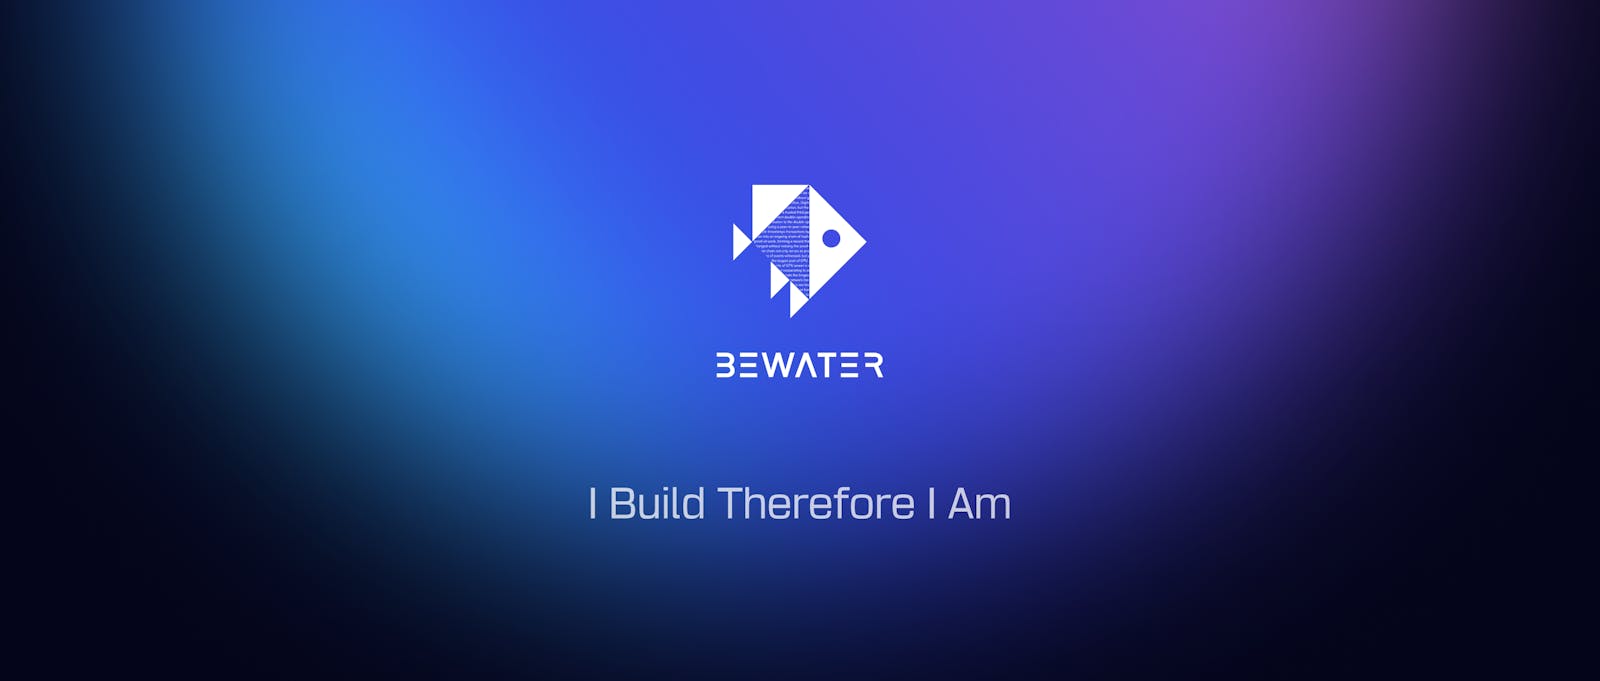 Get Ready to Start Your Innovation Journey with BeWater - Launching Soon!